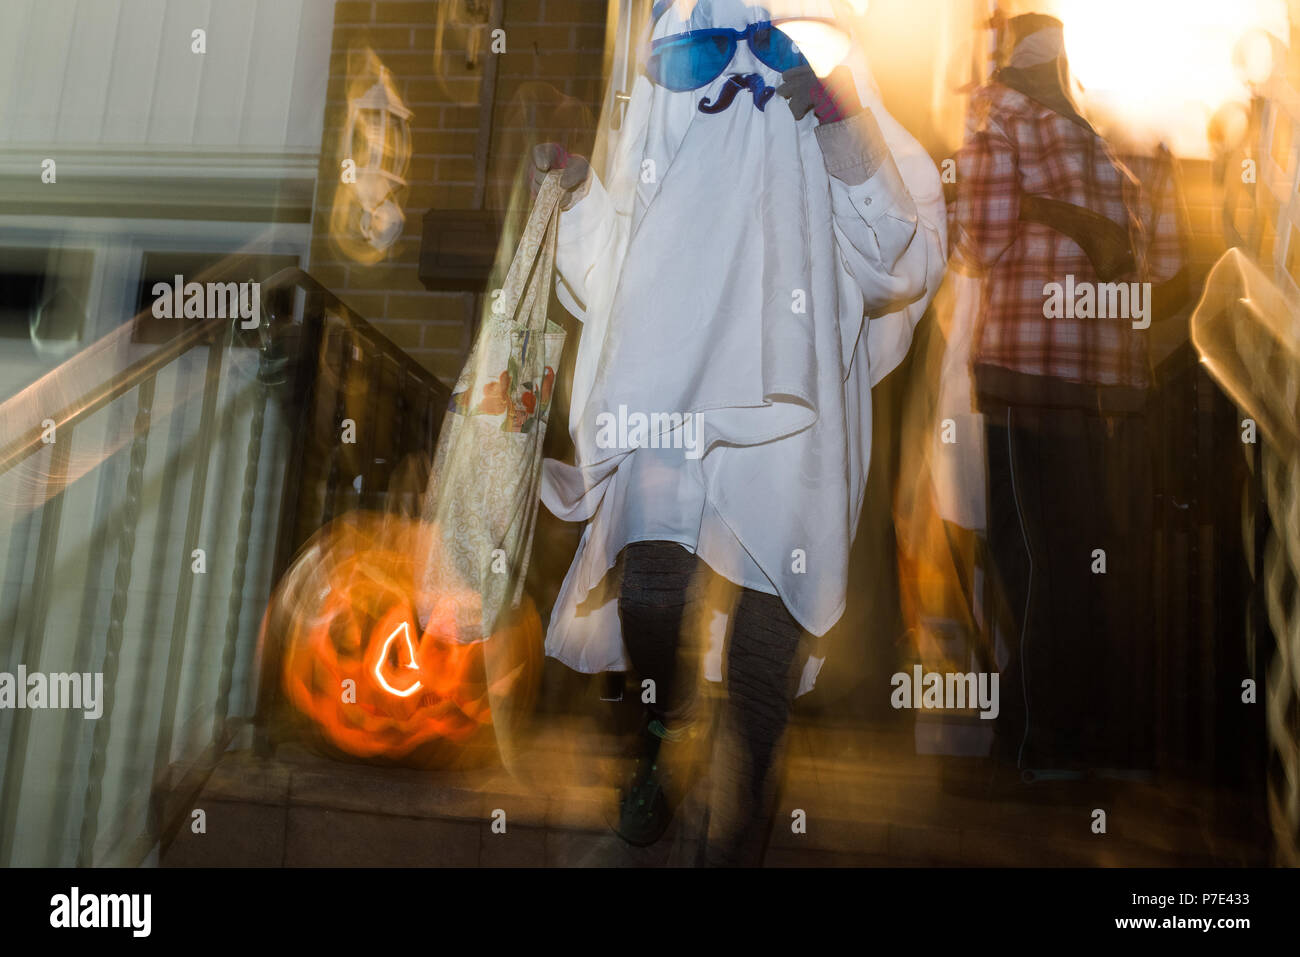 Girl dressed as ghost with mustache and over sized sunglasses, blurred Stock Photo